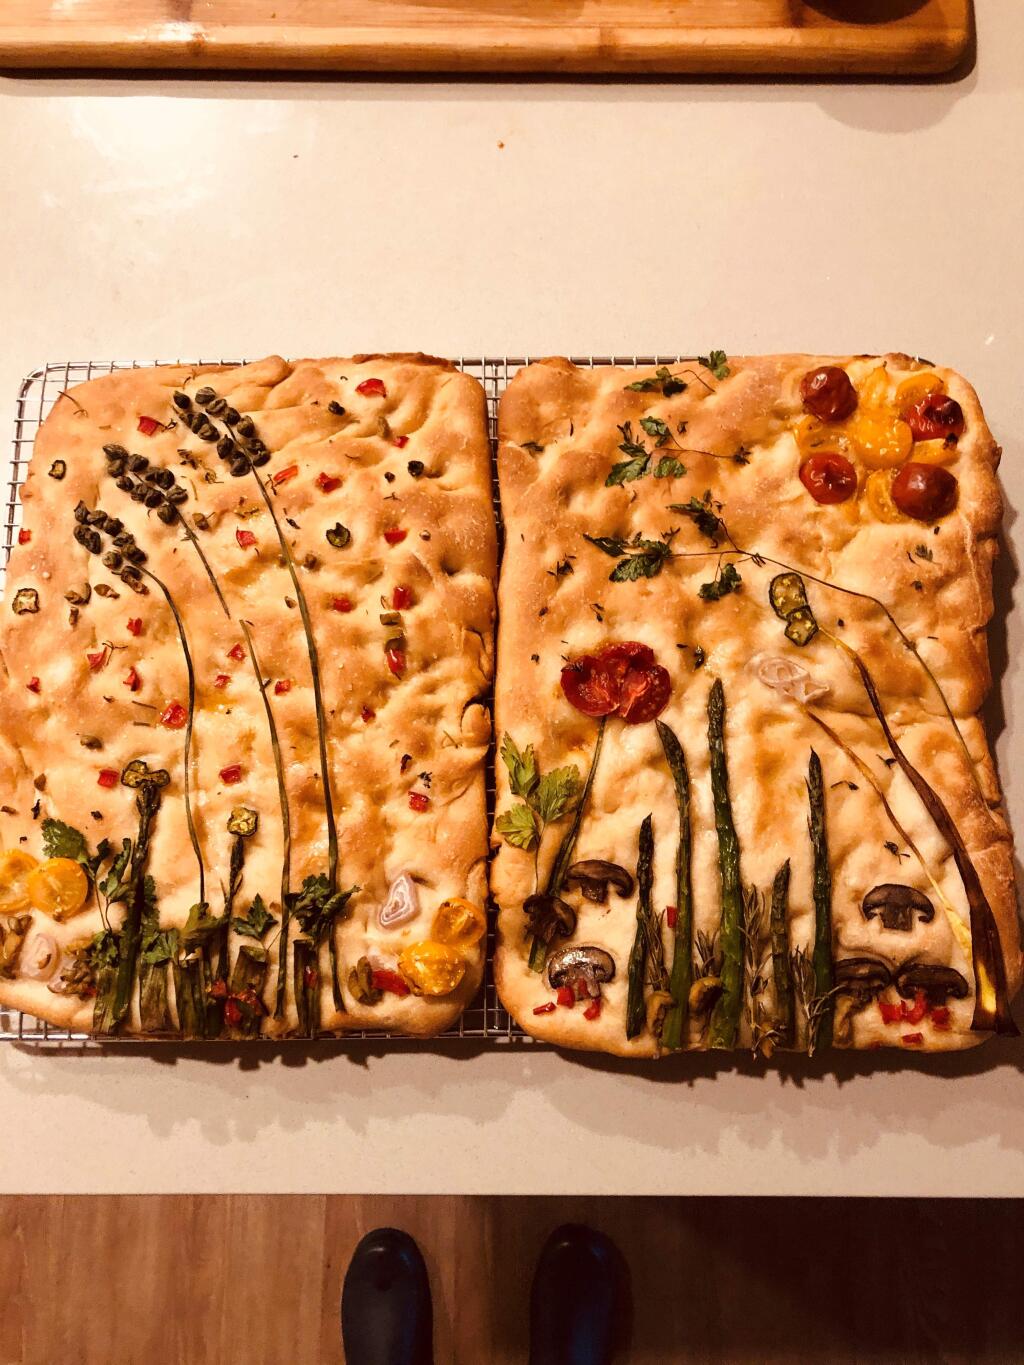 This foccacia bread was made with sourdough starter that came from Alaska and now resides with Steve Kyle of Sonoma. Kyle's niece baked this.